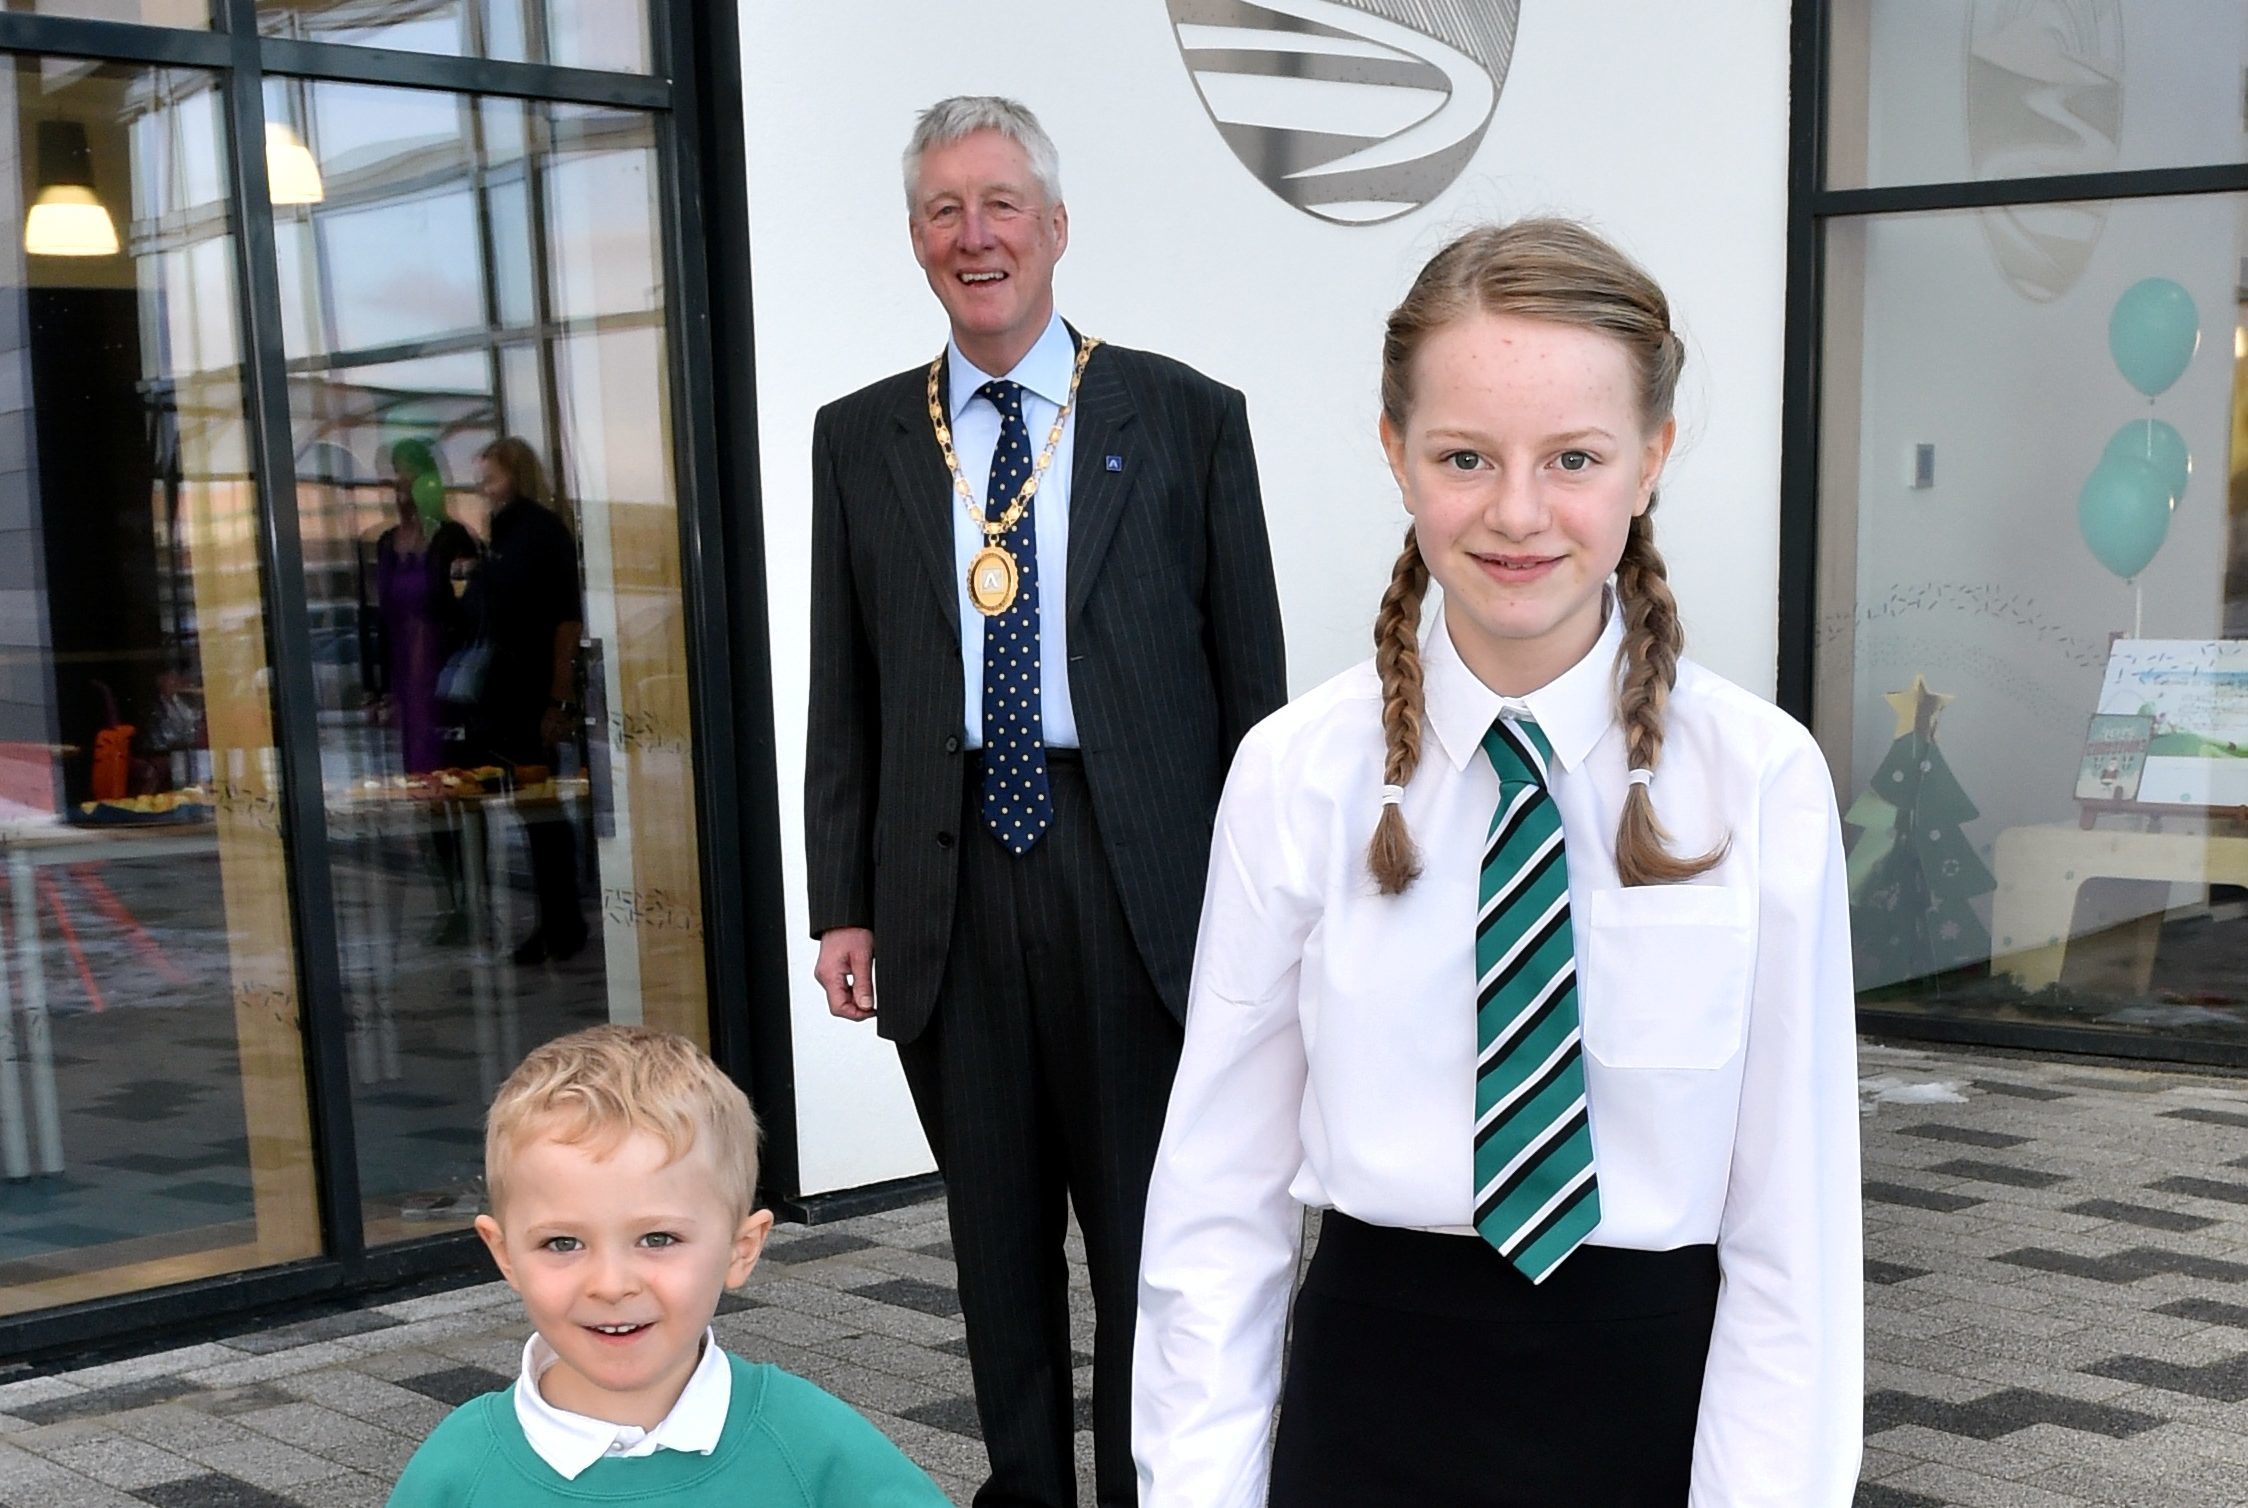 Aberdeenshire Provost Bill Howatson with Rachel Boyle, 12 and Andrew MacAngus, 5.
Picture by Colin Rennie